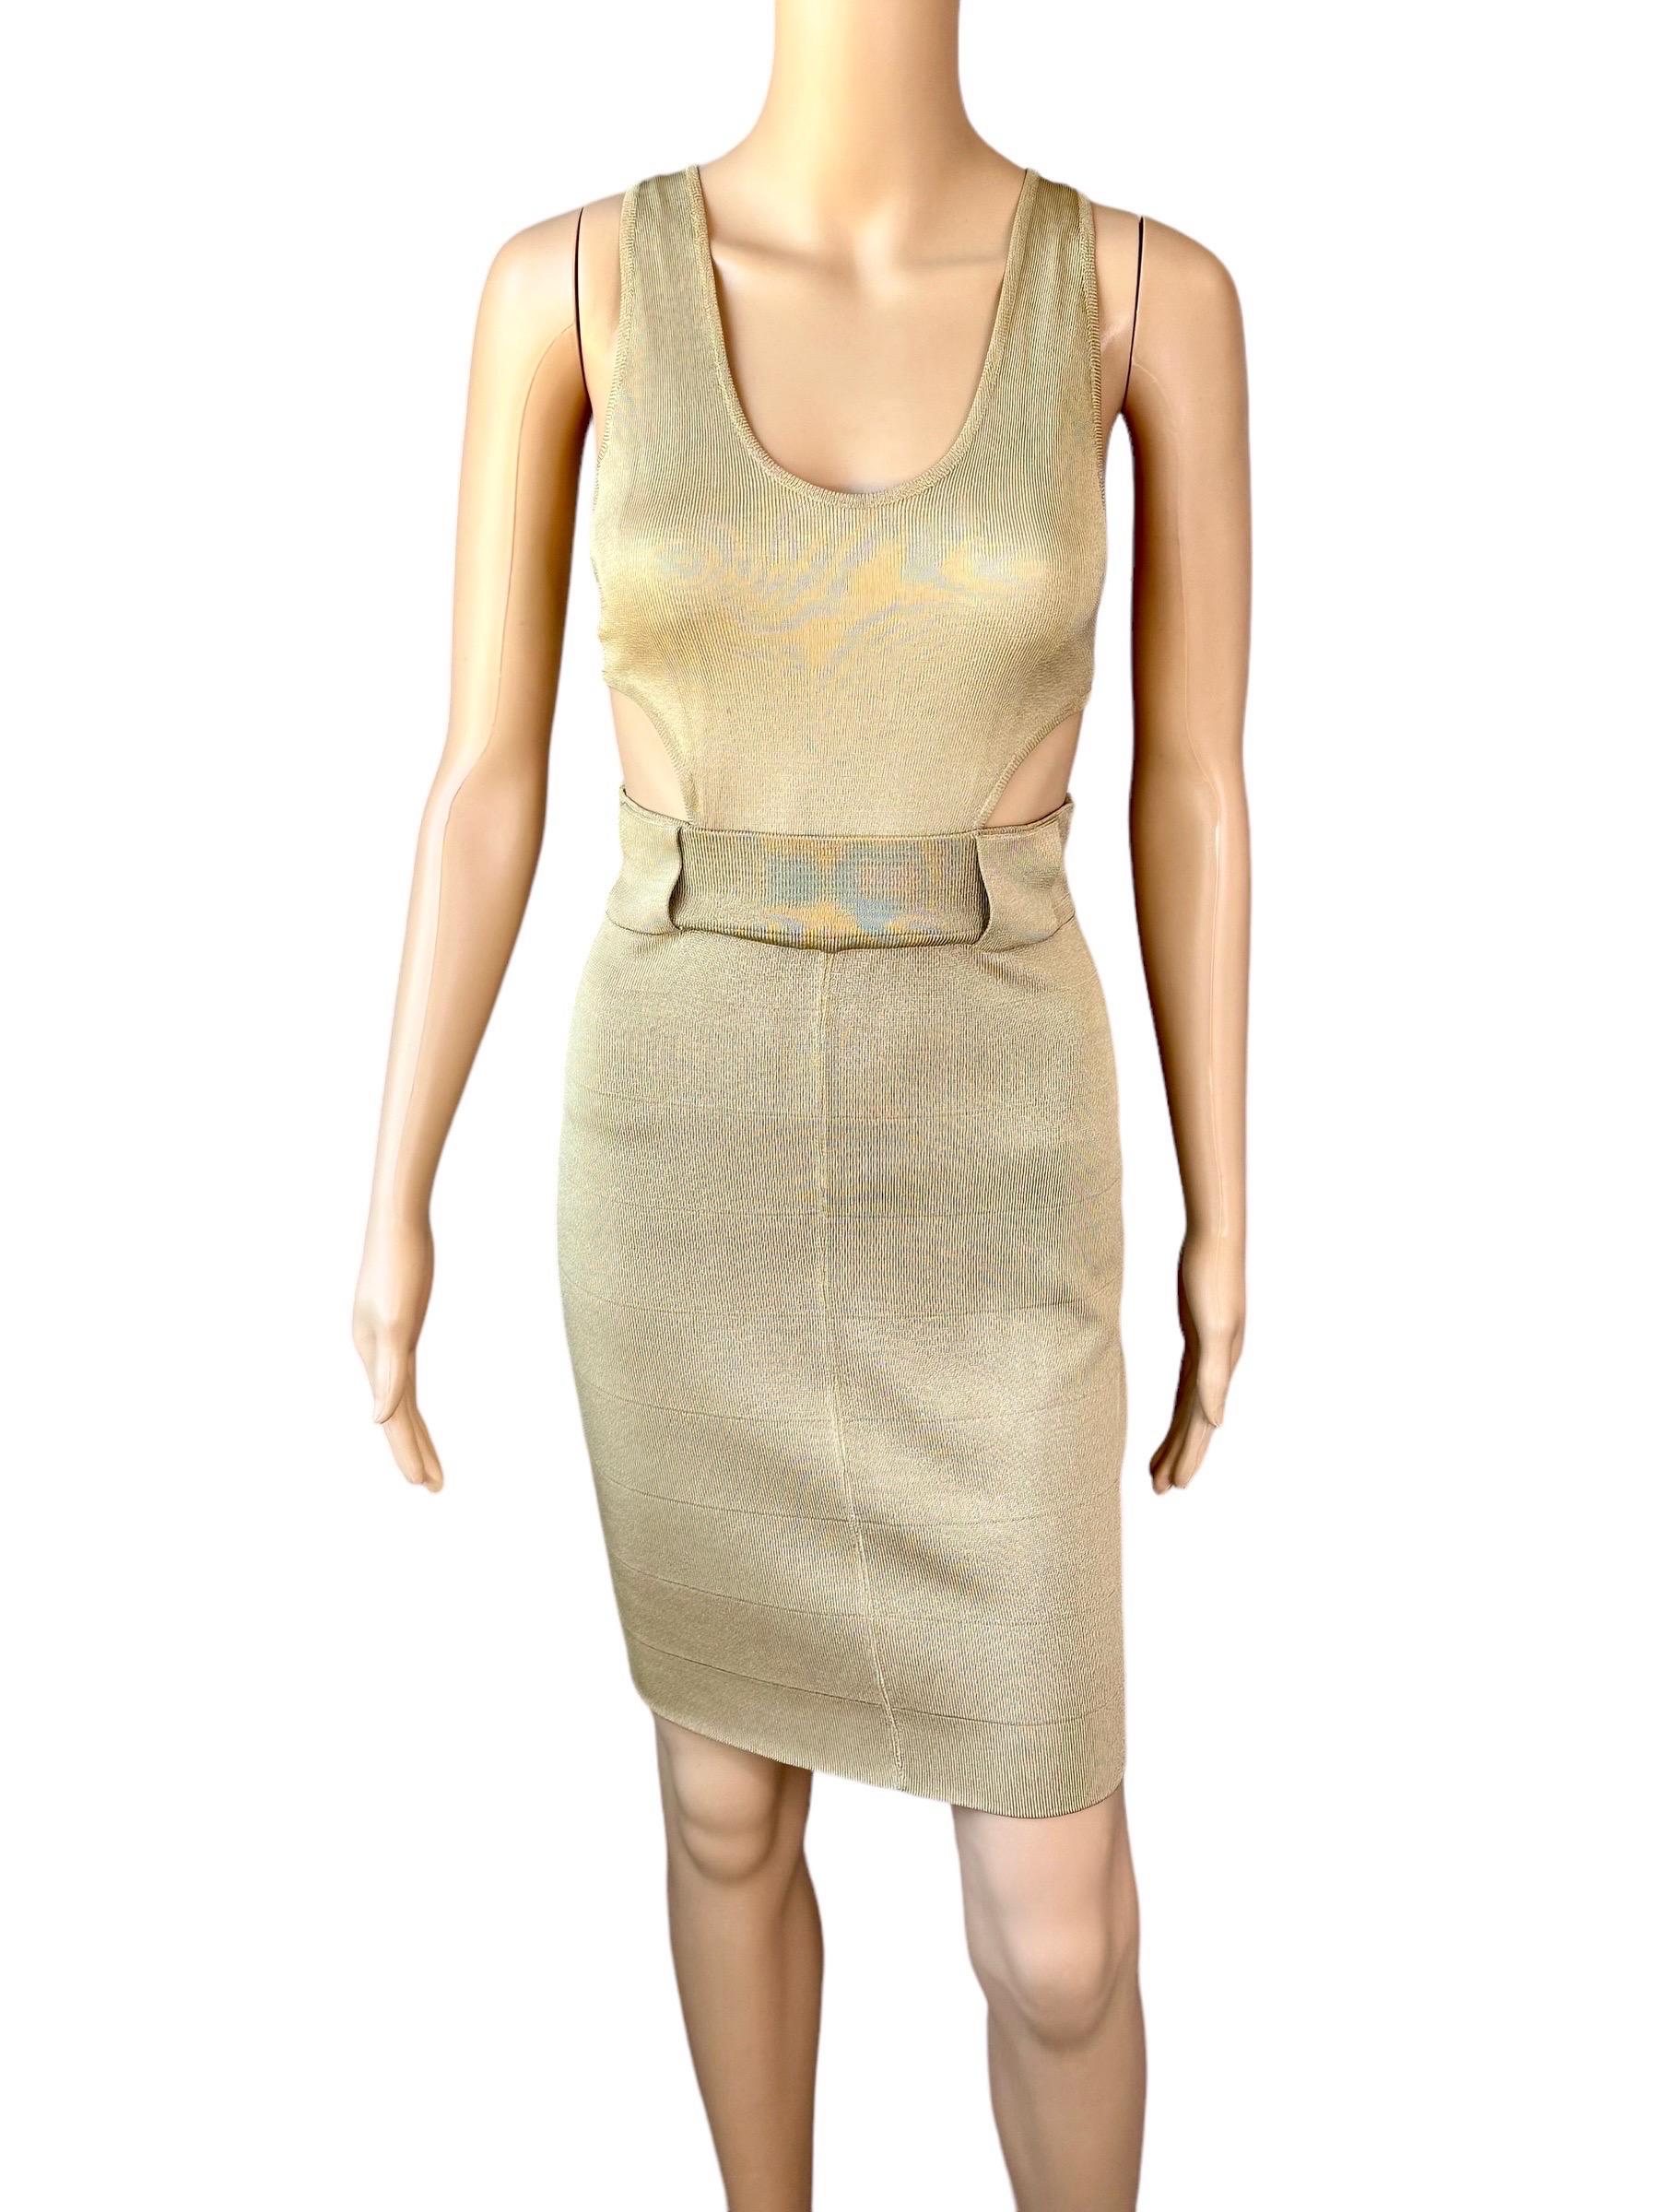 Azzedine Alaia S/S 1985 Vintage Plunged Cutout Bodycon Beige Mini Dress In Good Condition For Sale In Naples, FL